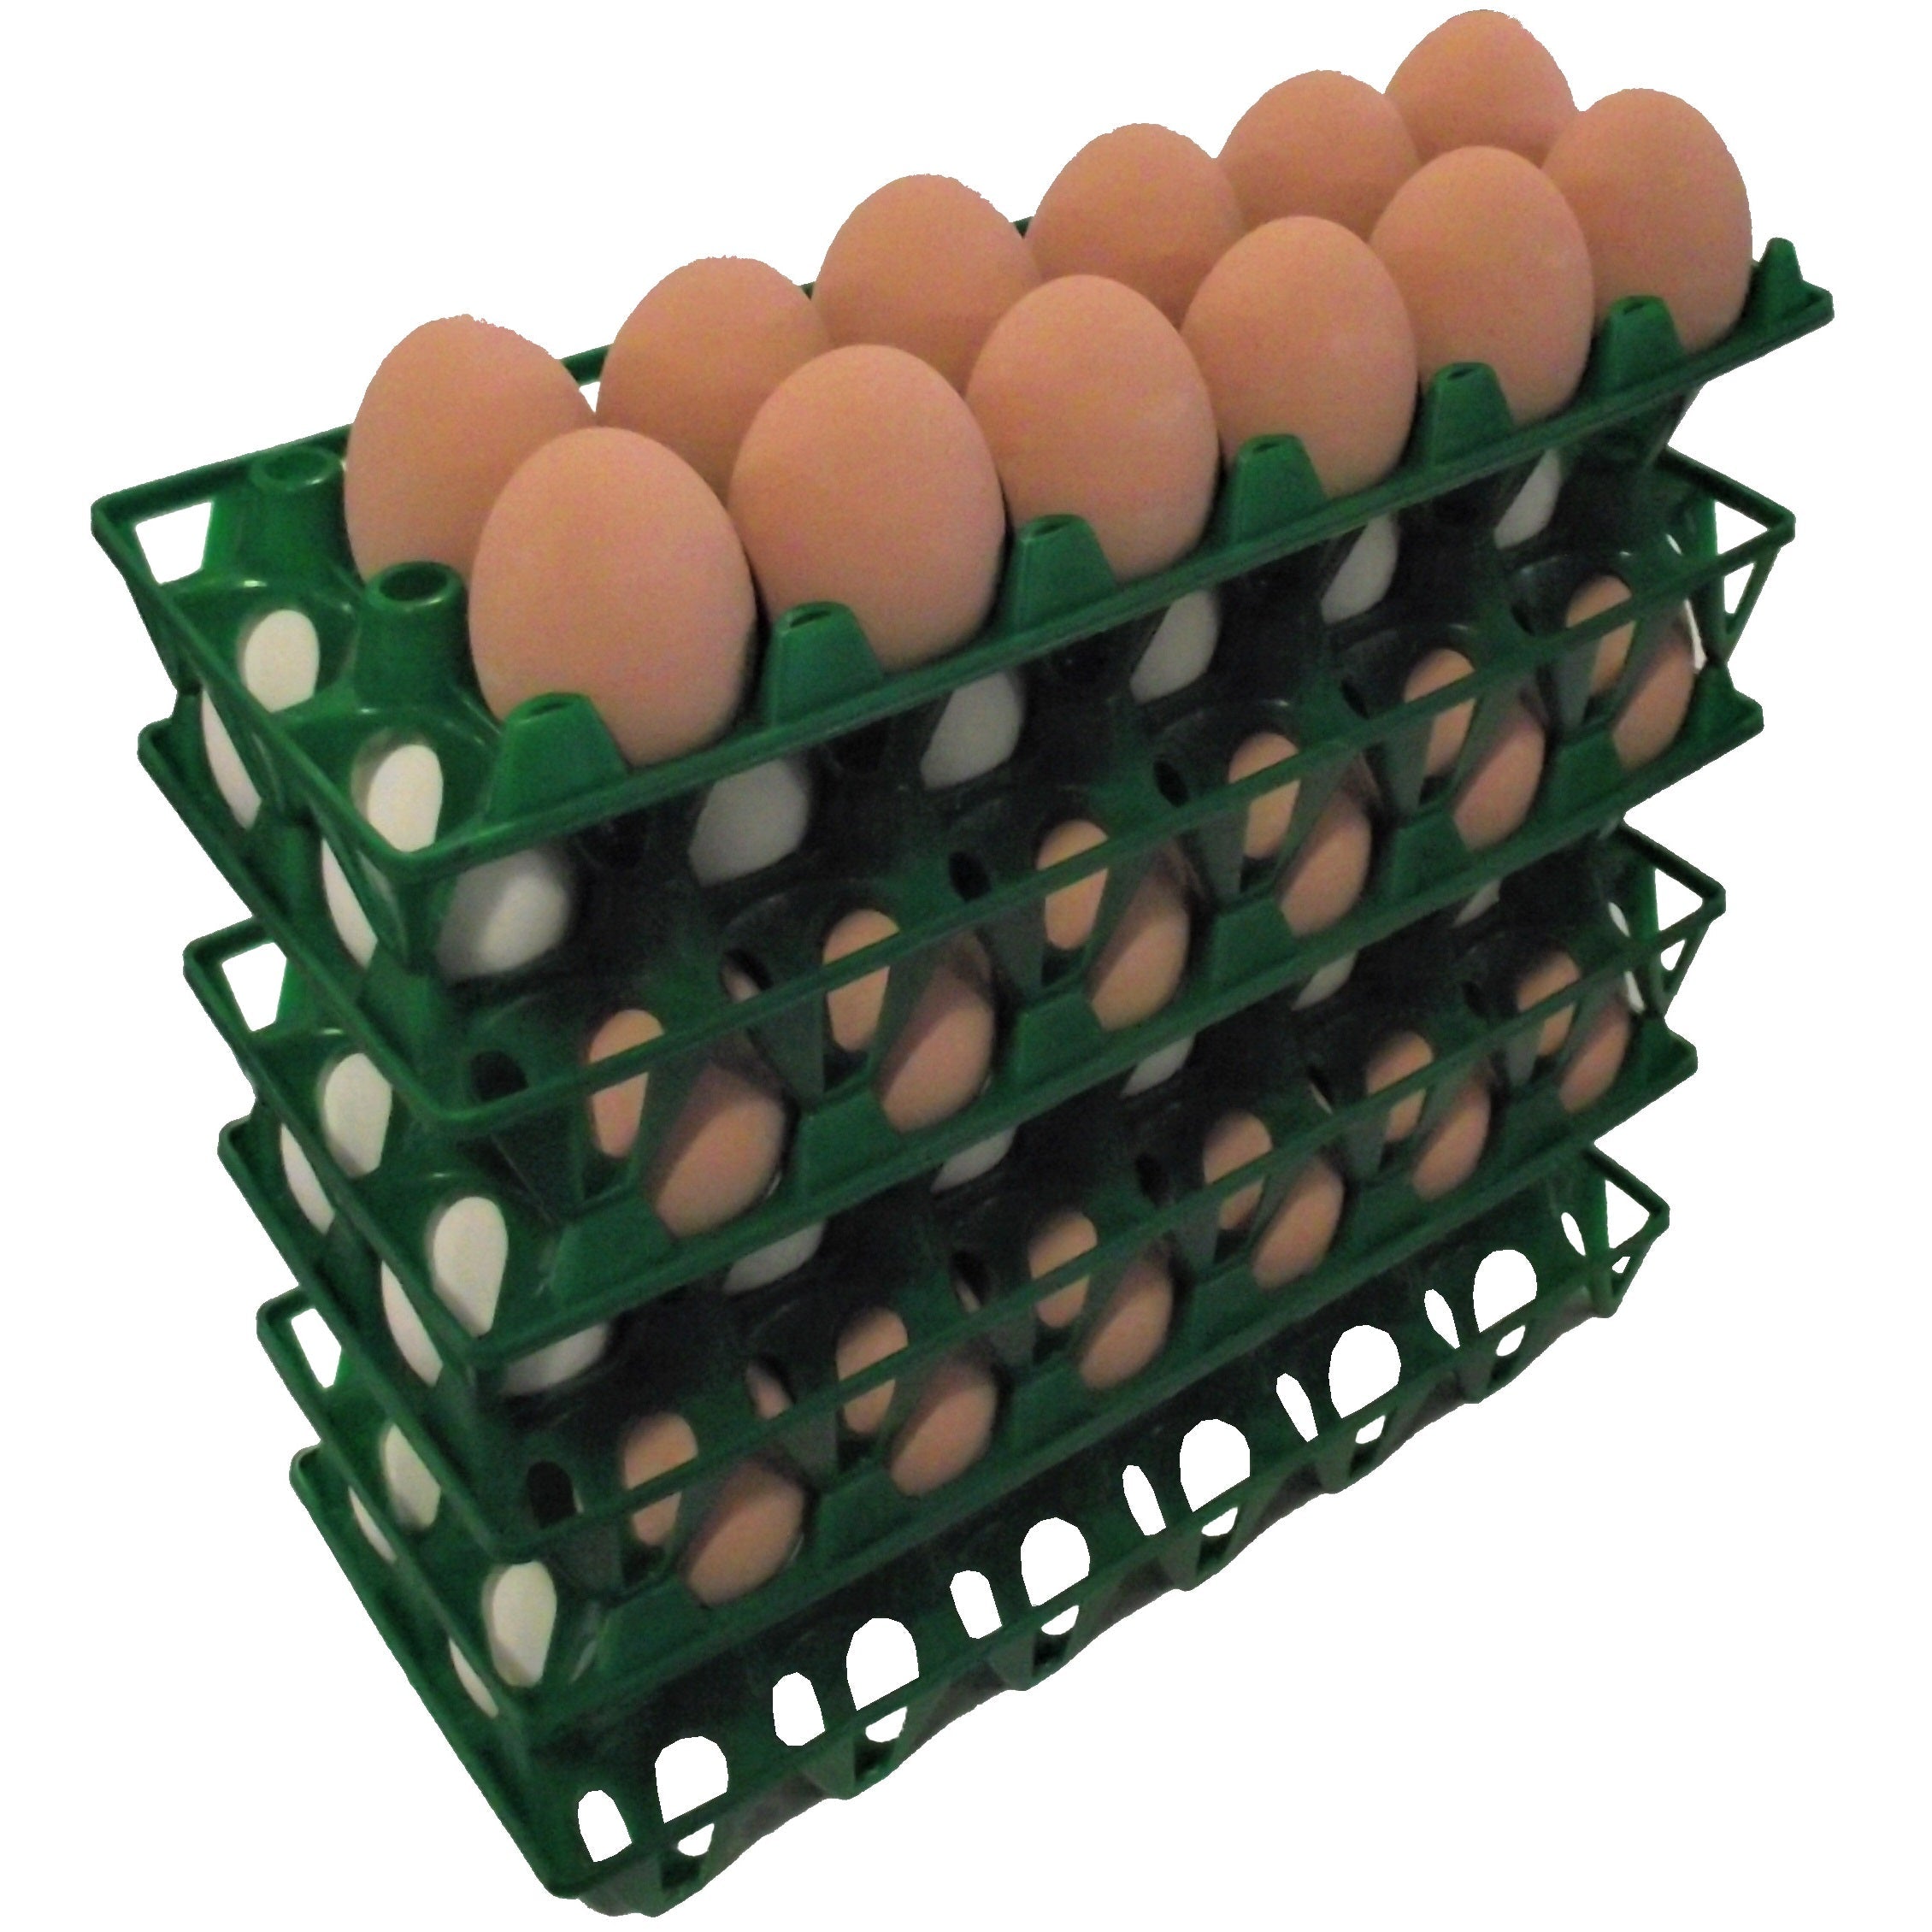 24 Pack of Rite Farm Products 12 Chicken Egg Poly Trays